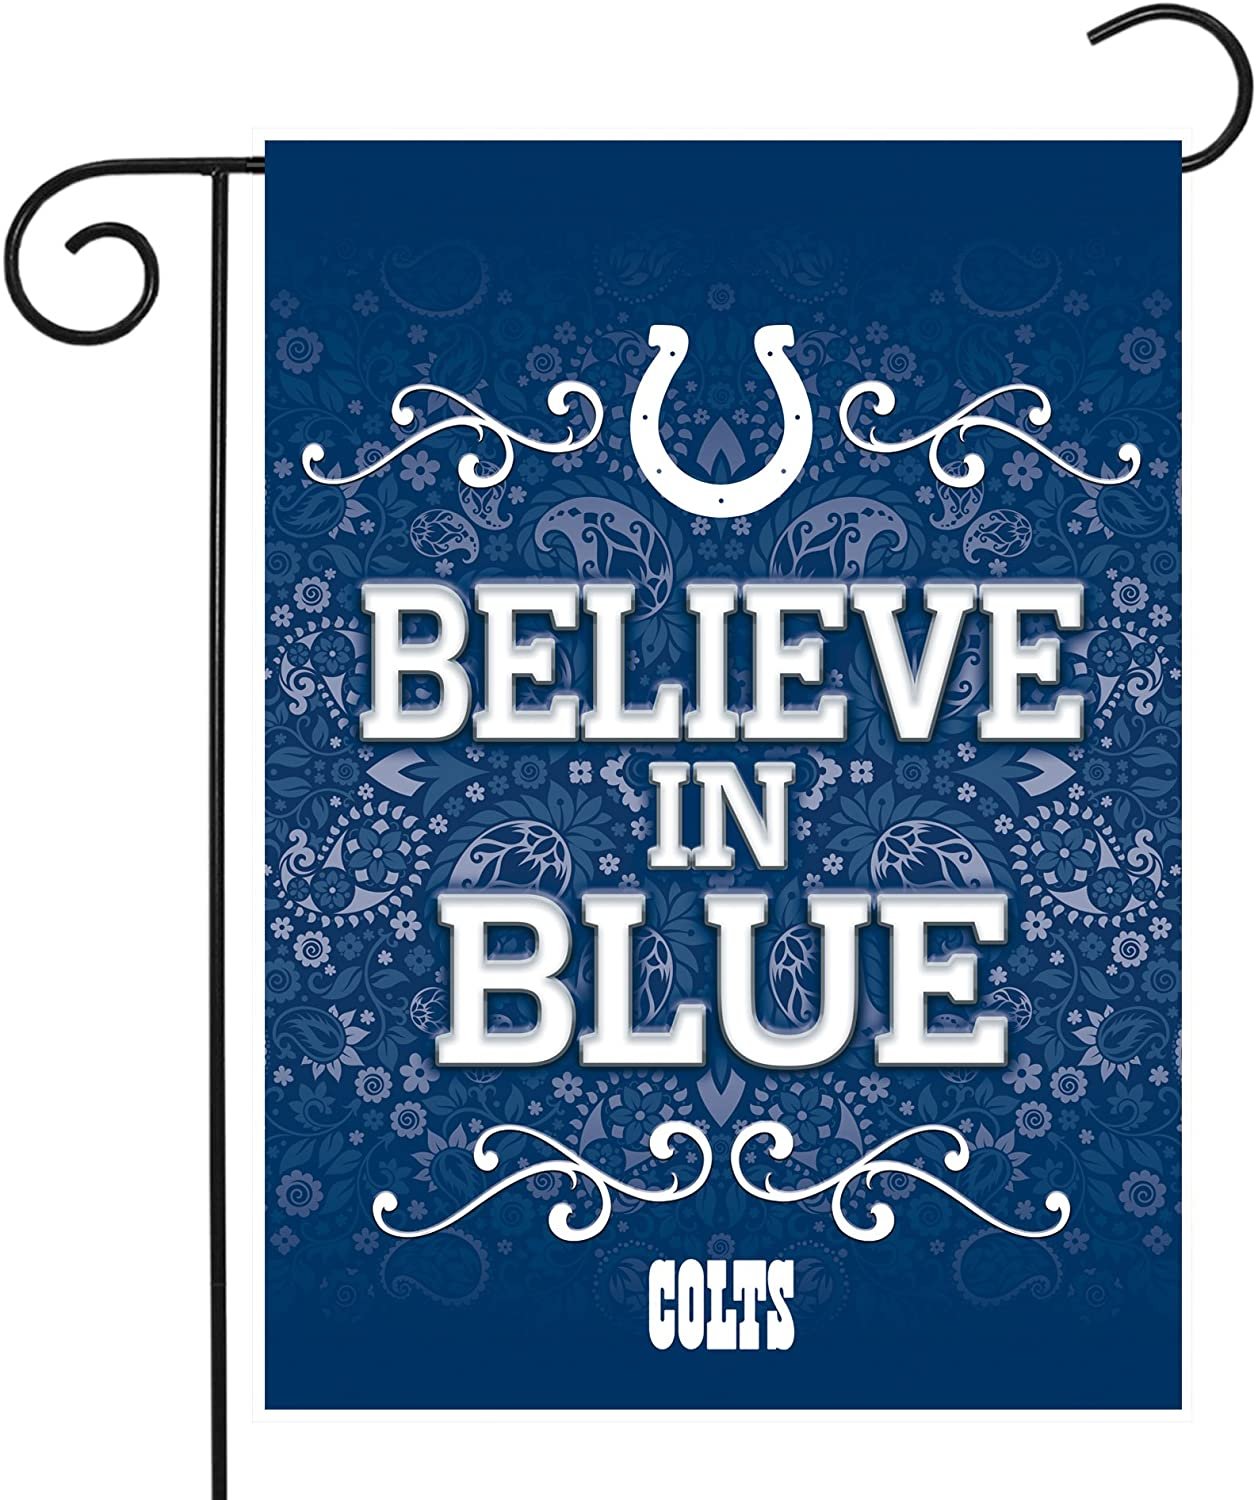 Indianapolis Colts Premium Garden Flag Banner, Double Sided, 13x18 Inch